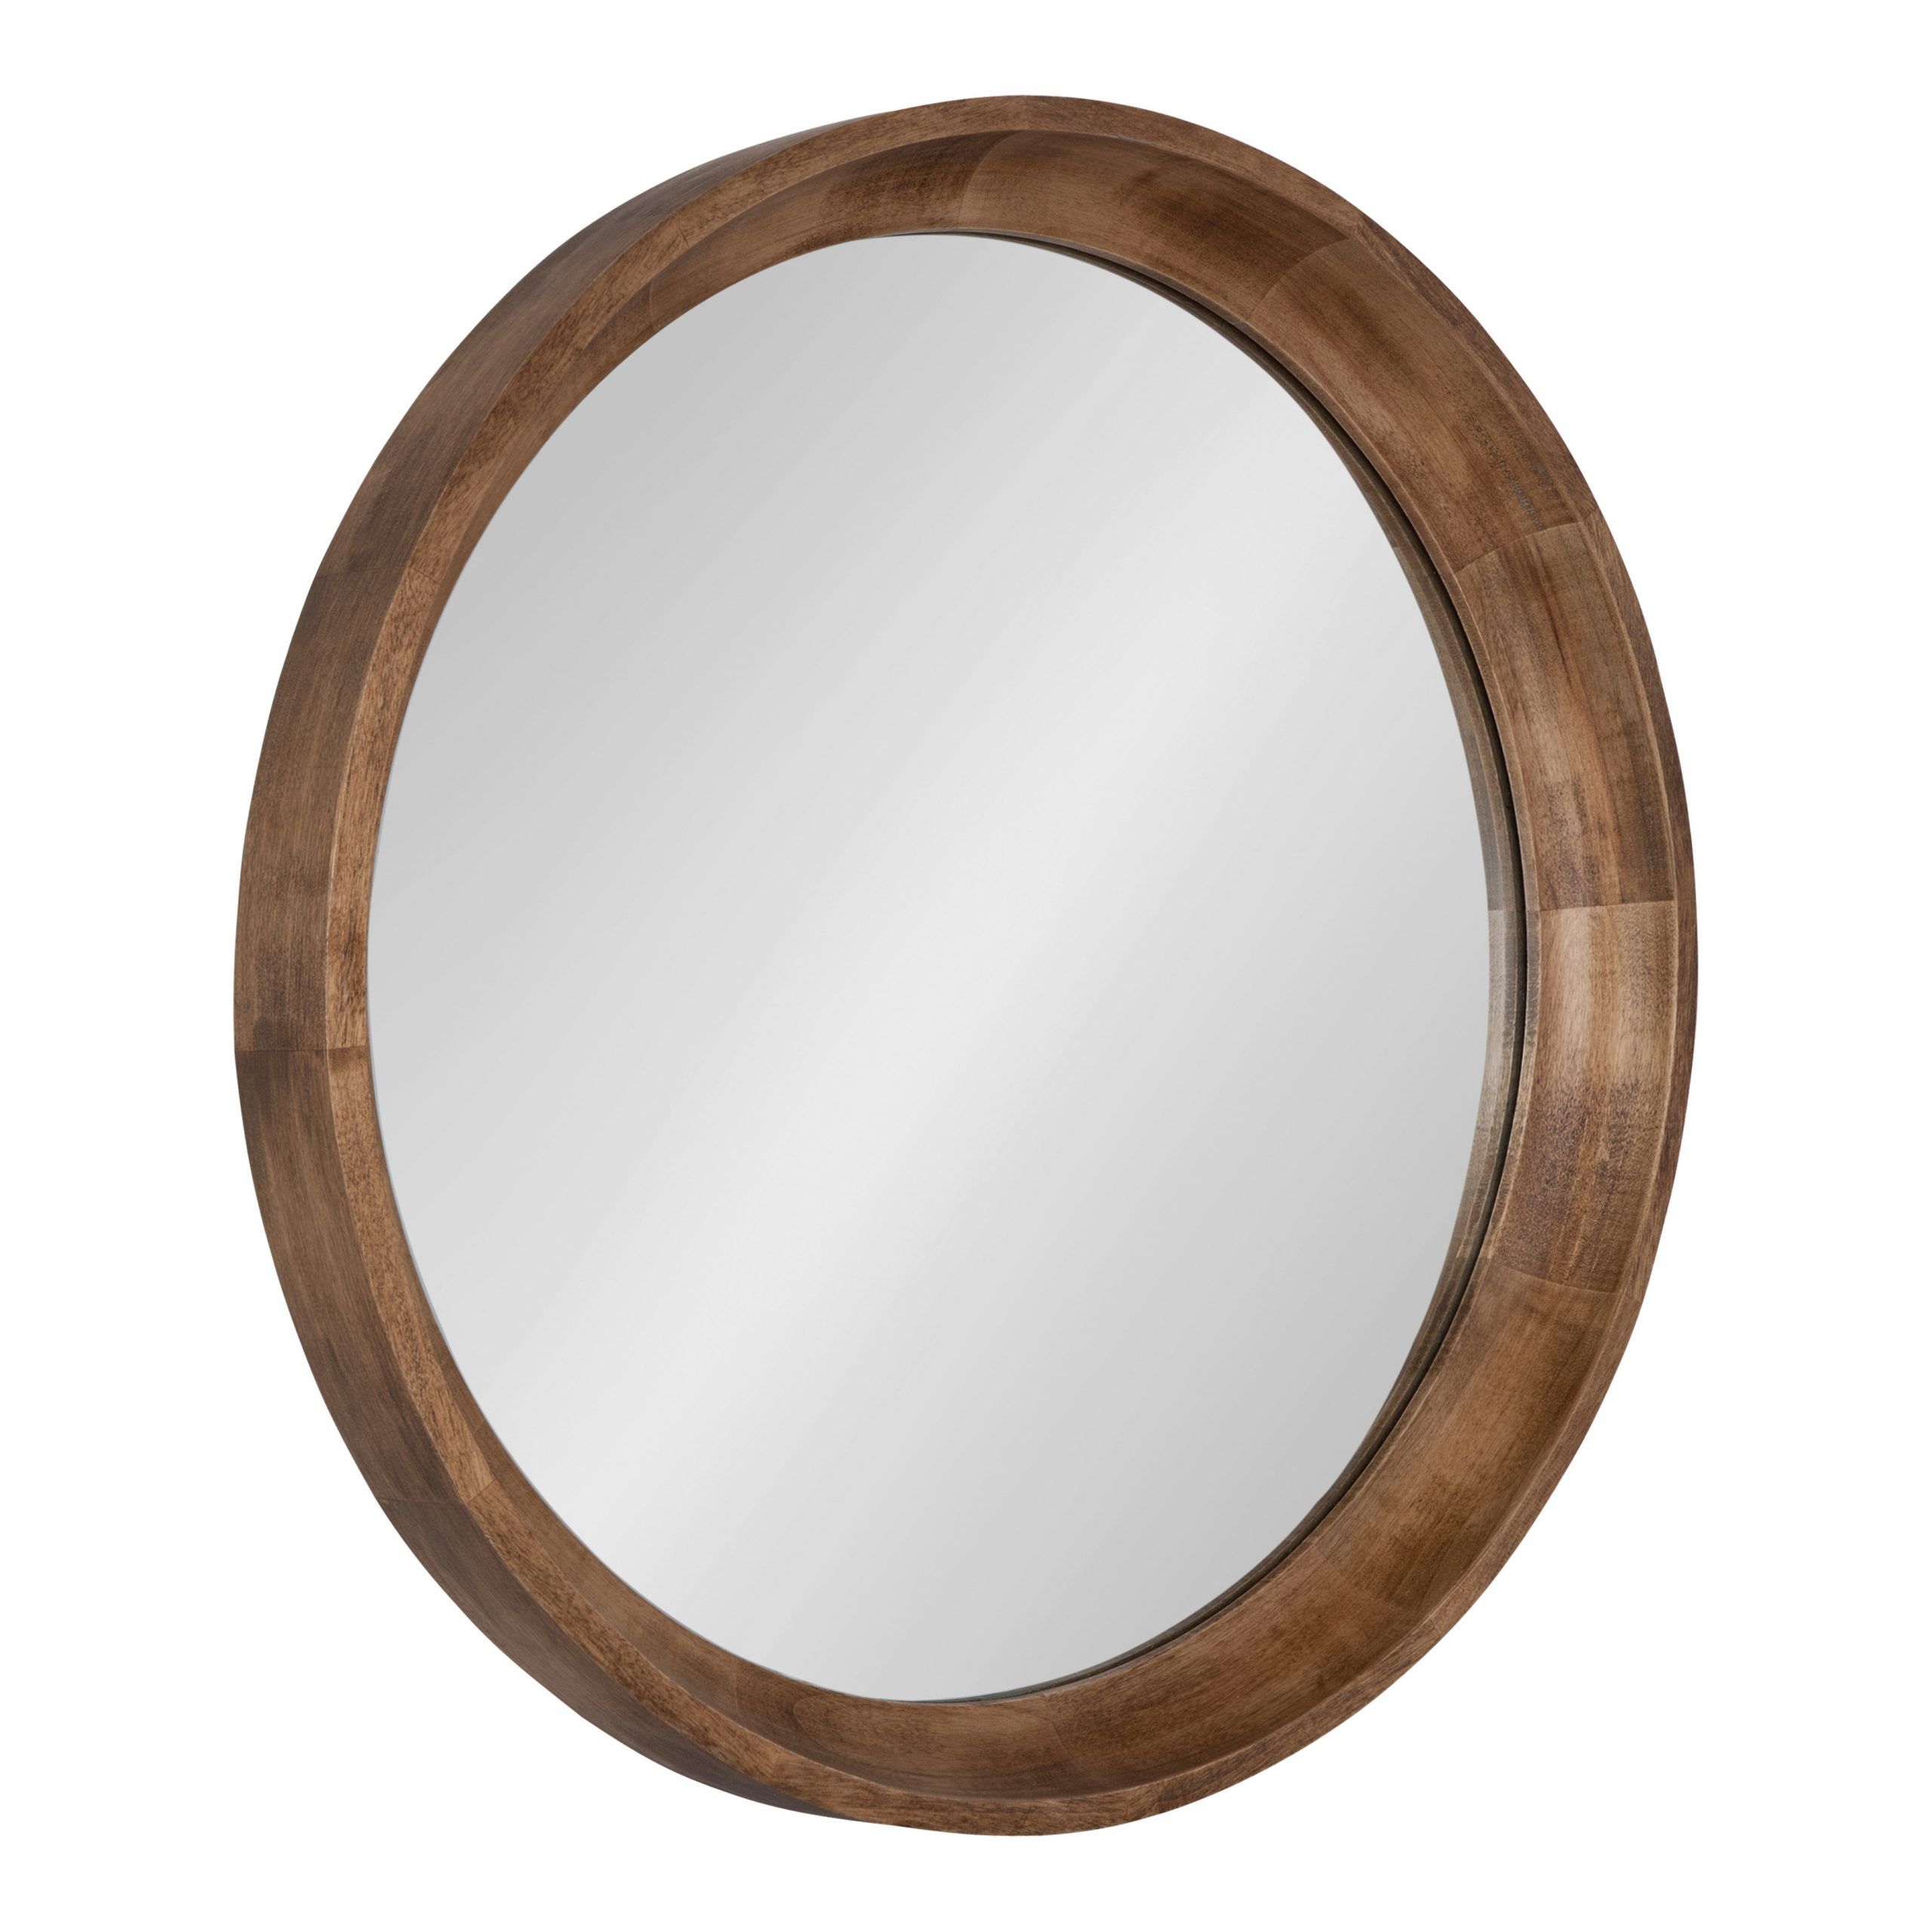 Kate And Laurel Colfax Round Wood Mirror, 22" Diameter, Natural Wood Throughout Wood Rounded Side Rectangular Wall Mirrors (View 1 of 15)